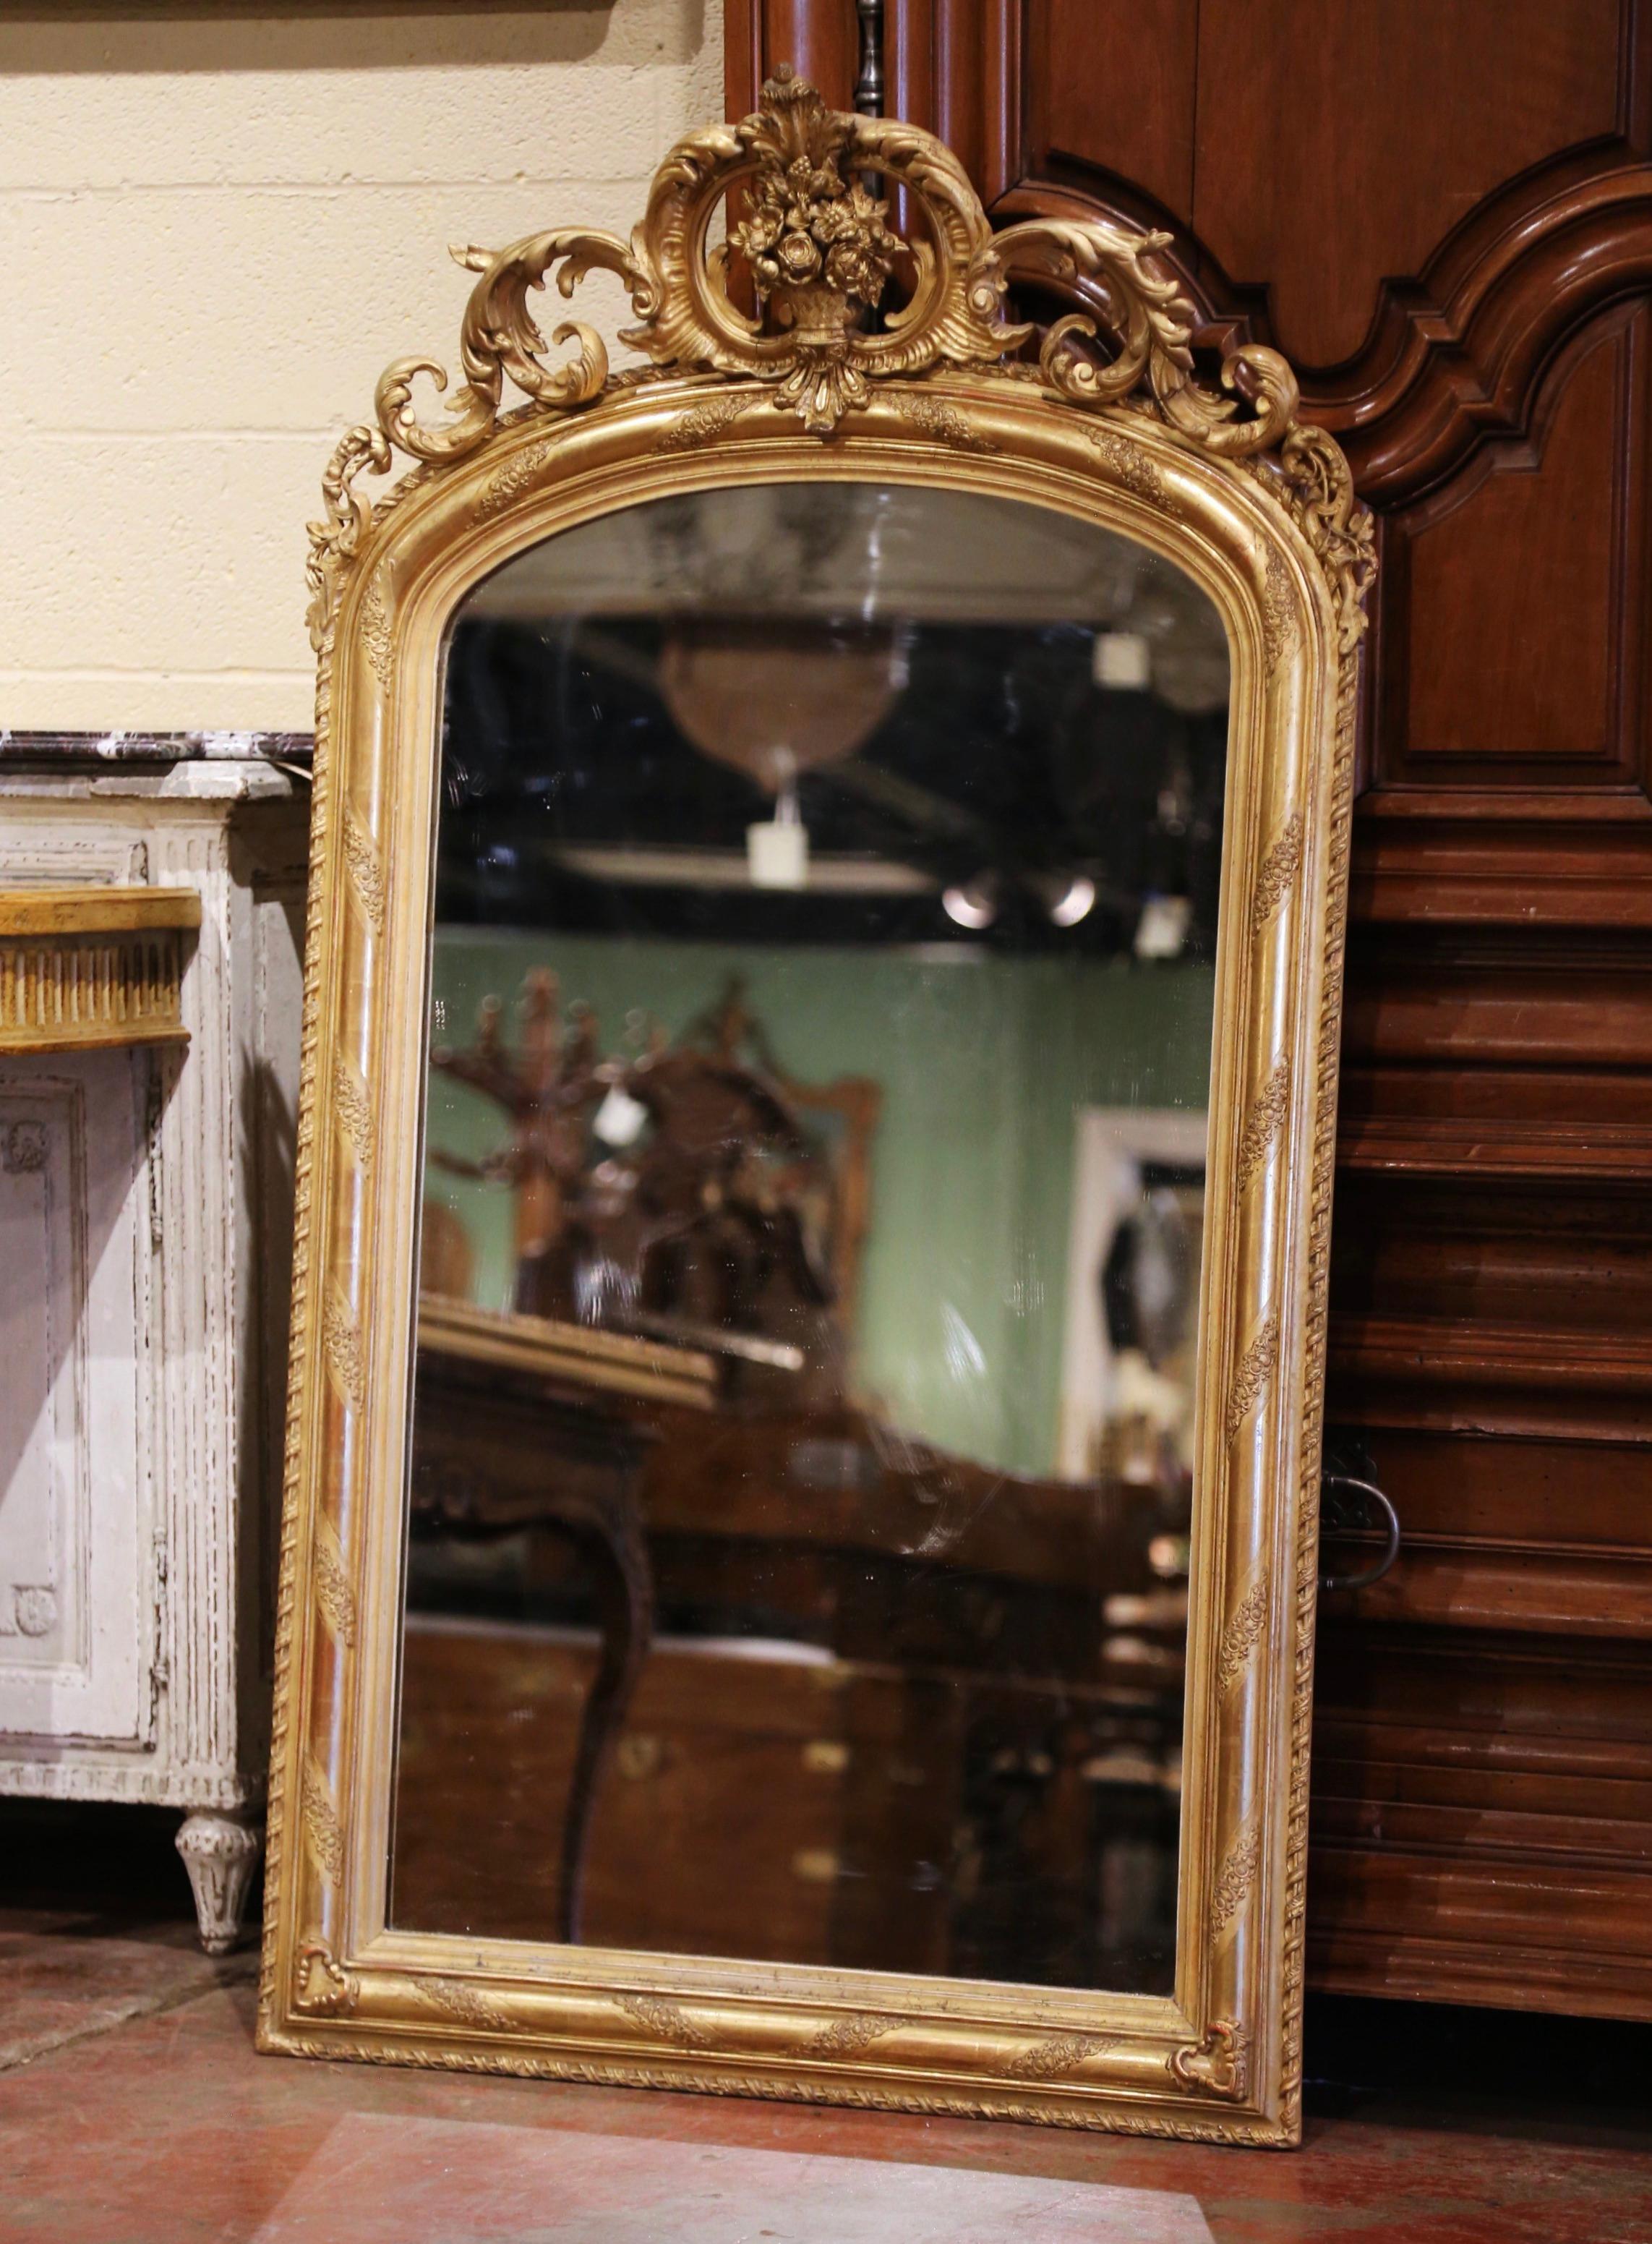 This elegant antique mirror was crafted in France, circa 1870. Arched at the top, the ornate pediment features a floral decor cartouche with leaves on the sides and the frame is decorated with foliage motifs throughout. The Louis XV mirror has the